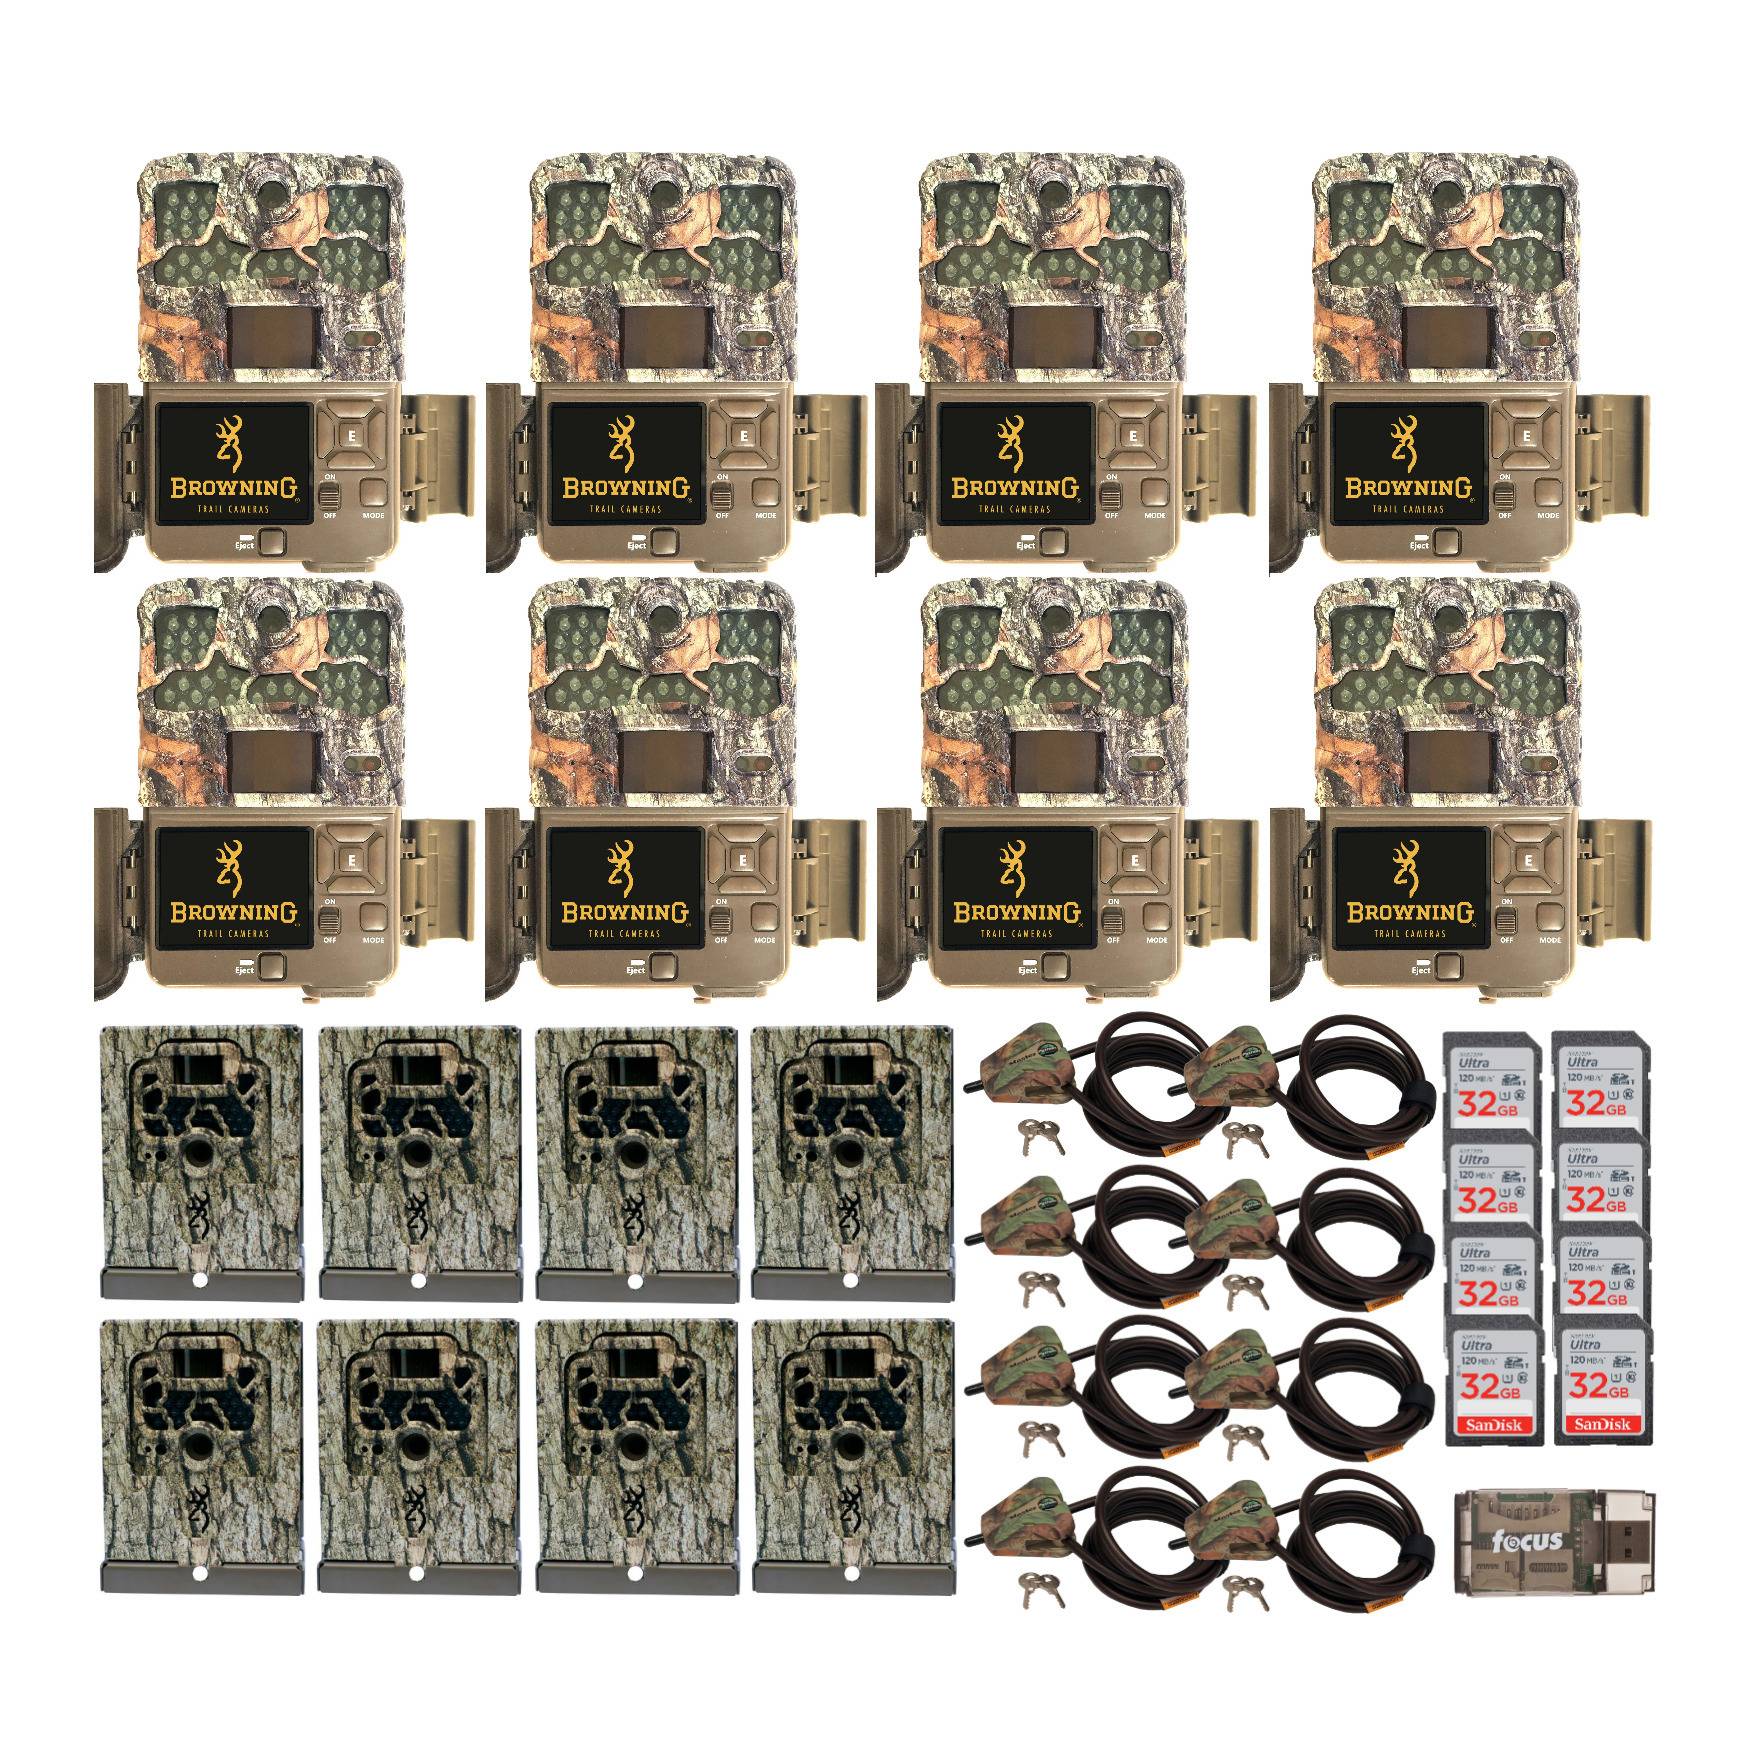 Browning Trail Cameras 20MP Recon Force Edge Trail Camera (8-Pack) with Security Boxes, Cables, 32GB Cards, and Reader